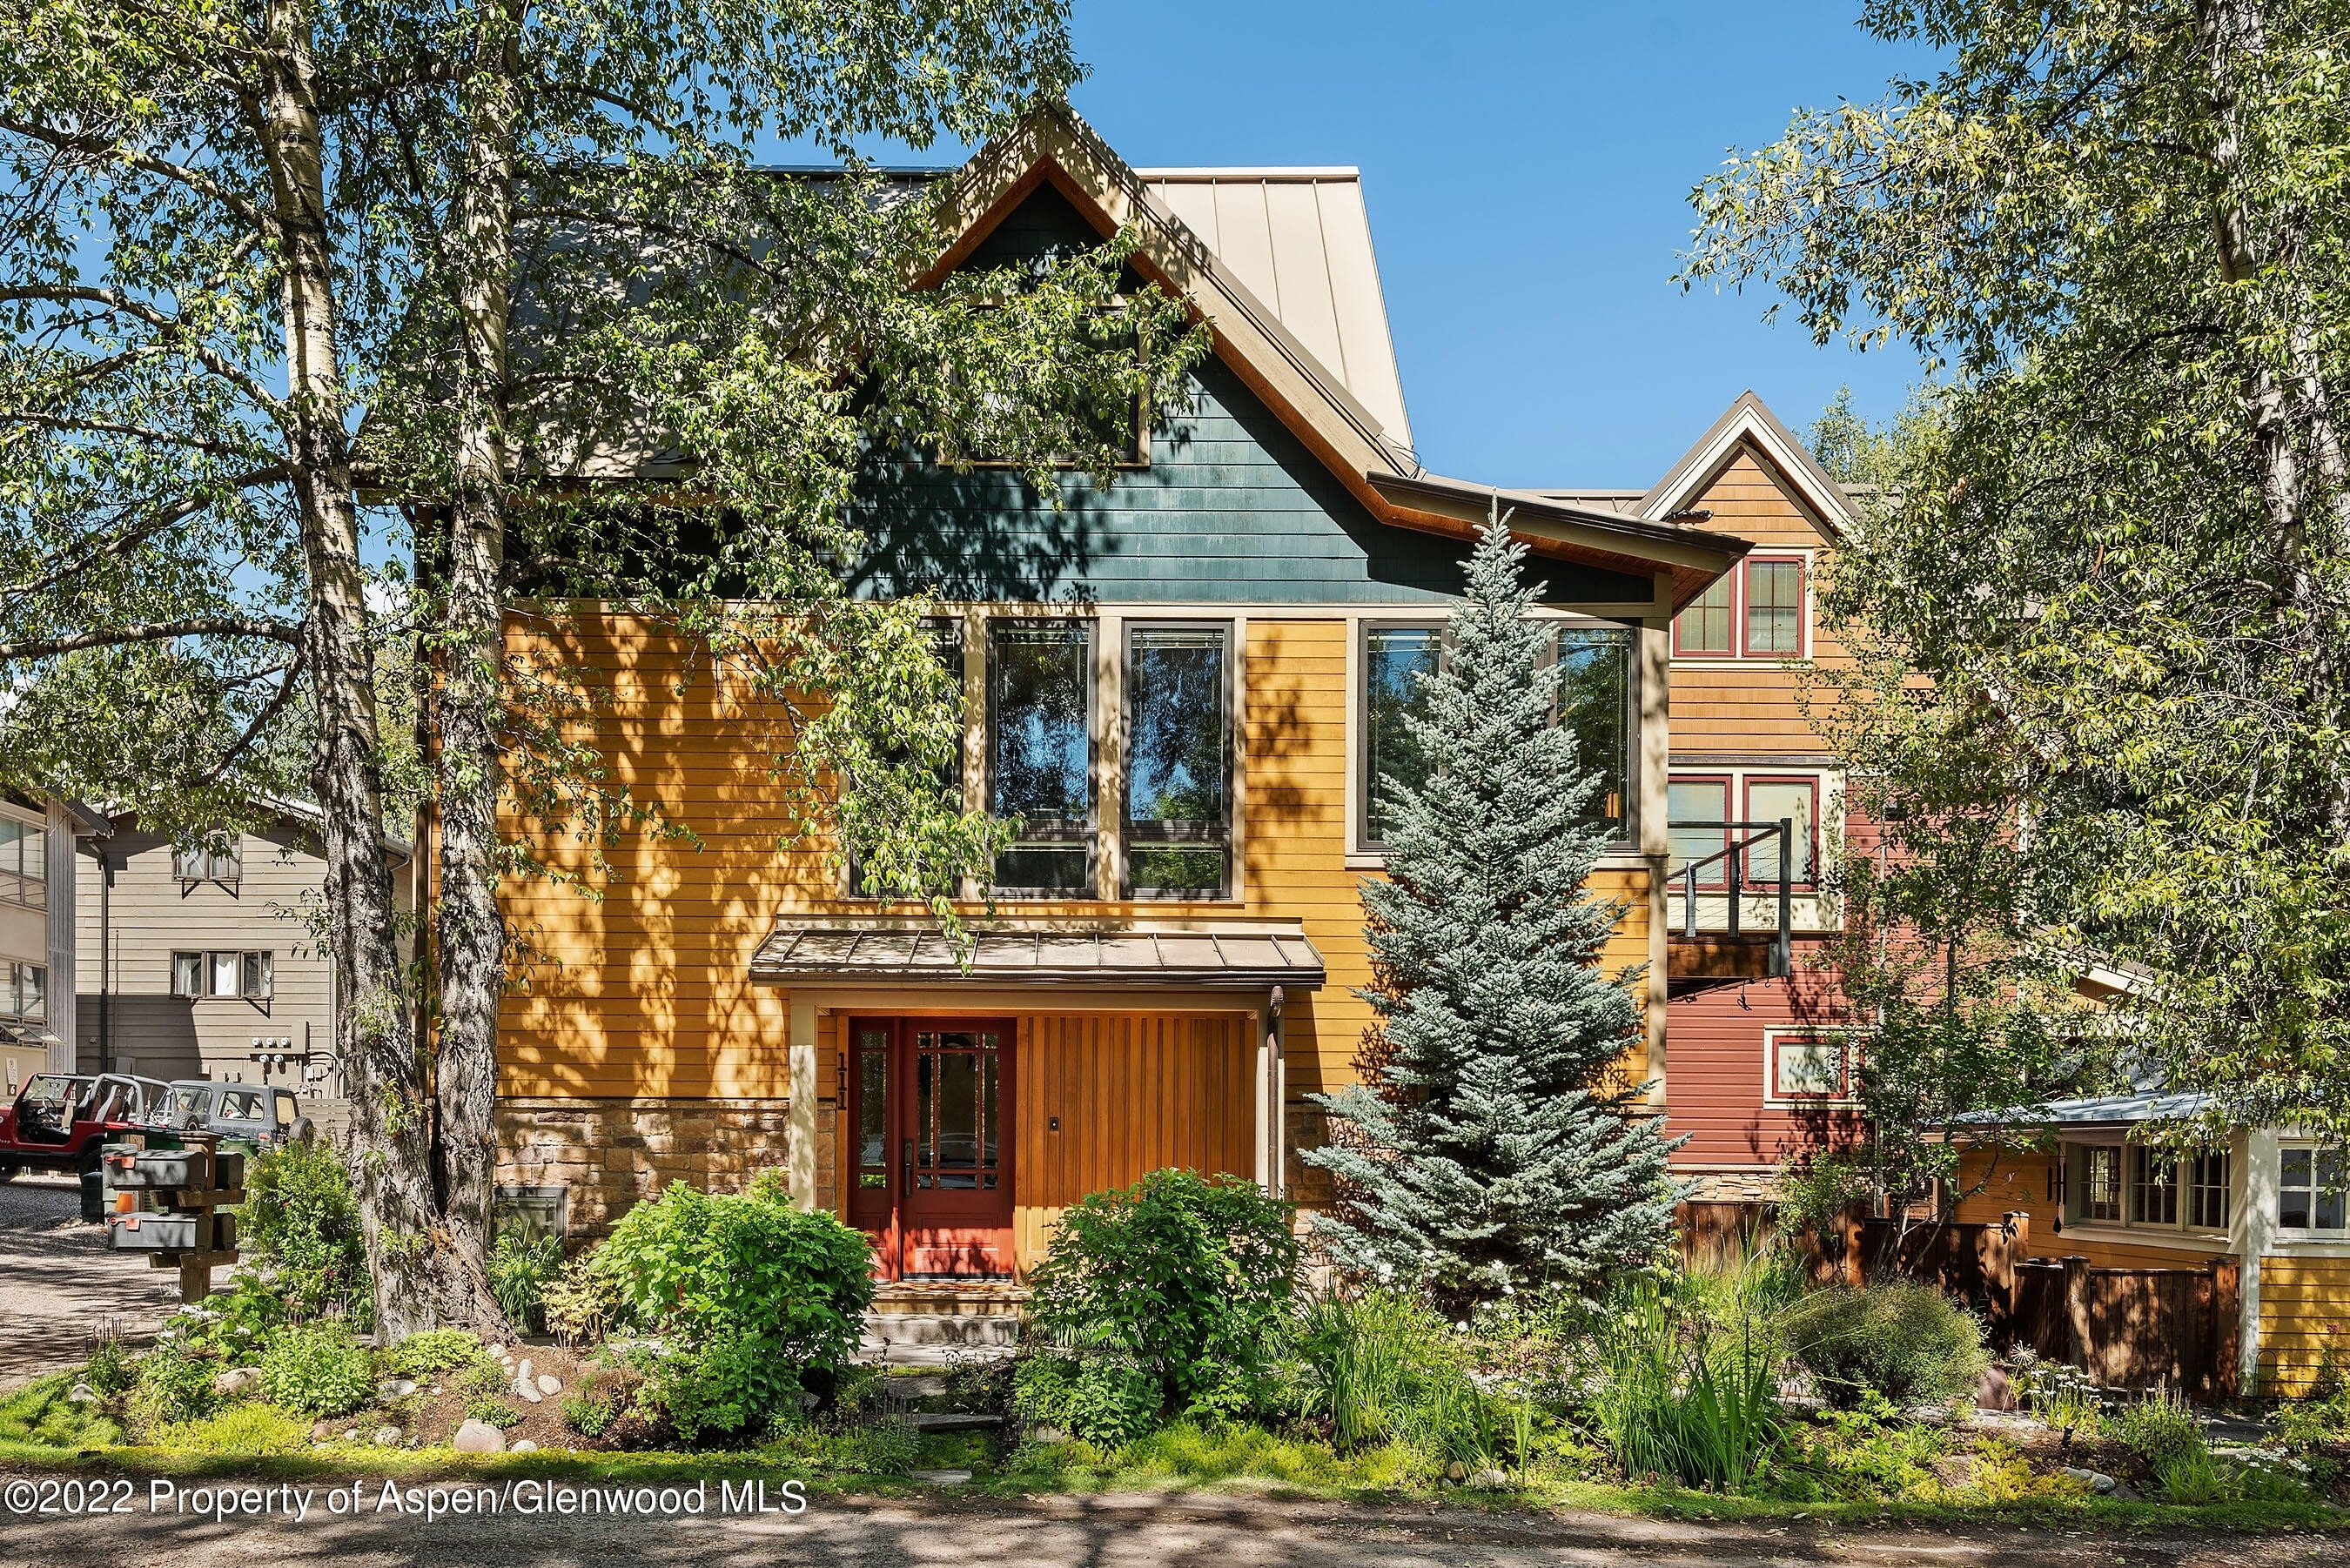 Single Family Home for Sale at Main Street Historic District, Aspen, CO 81611